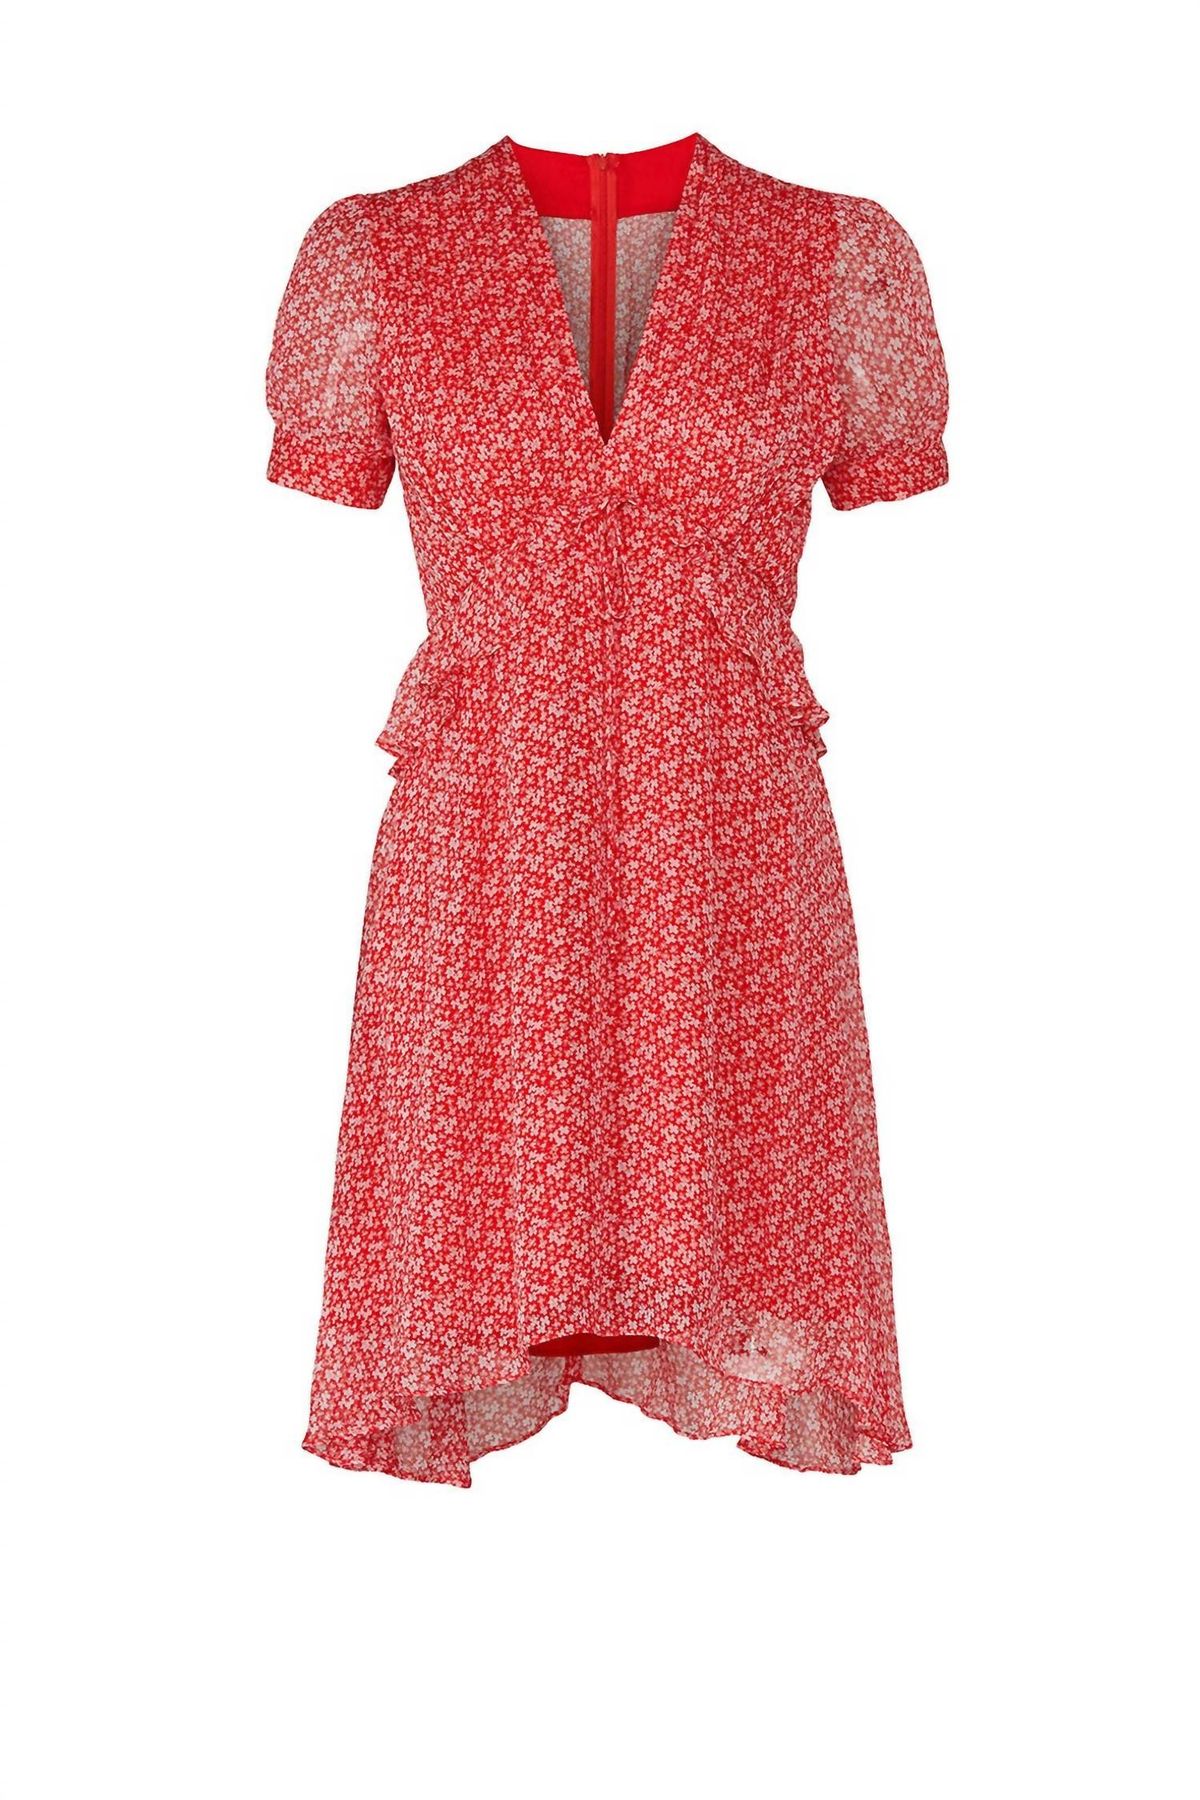 Style 1-1564392717-649-1 THE KOOPLES Size 2 Wedding Guest Floral Red Cocktail Dress on Queenly